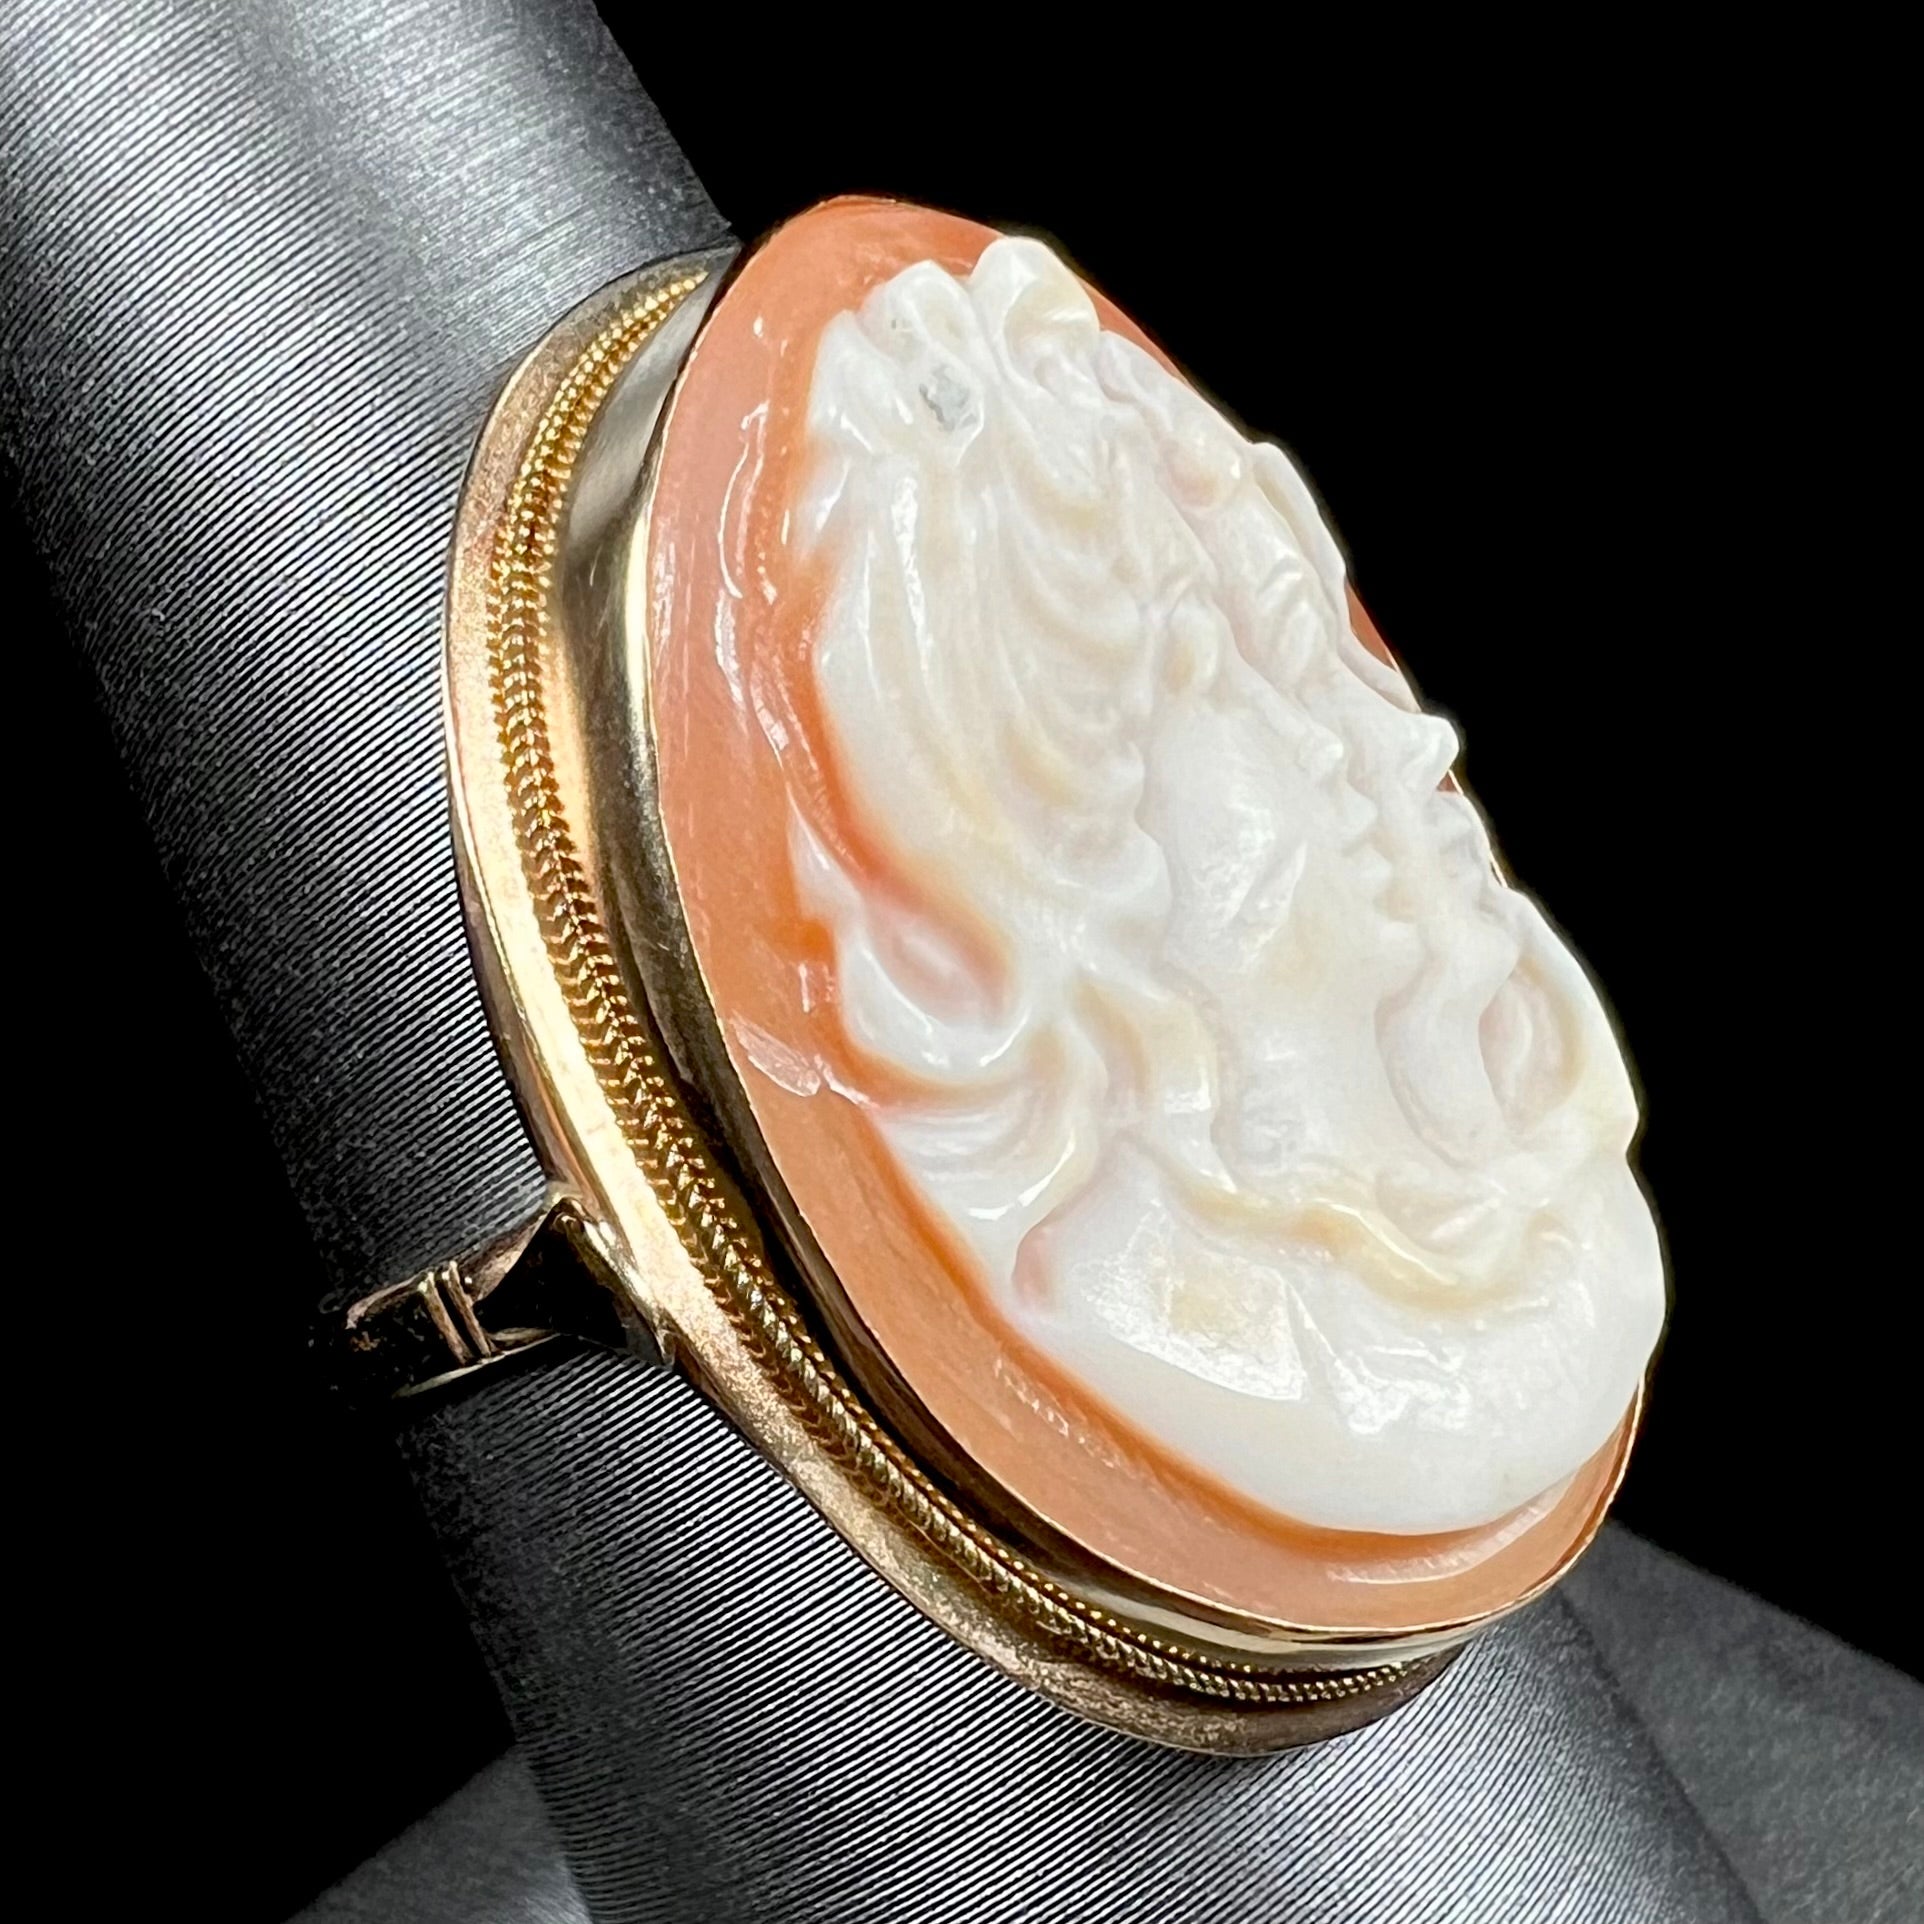 A ladies' vintage cameo solitaire ring in yellow gold.  The cameo is carved from shell and depicts the side profile of two womens' faces.